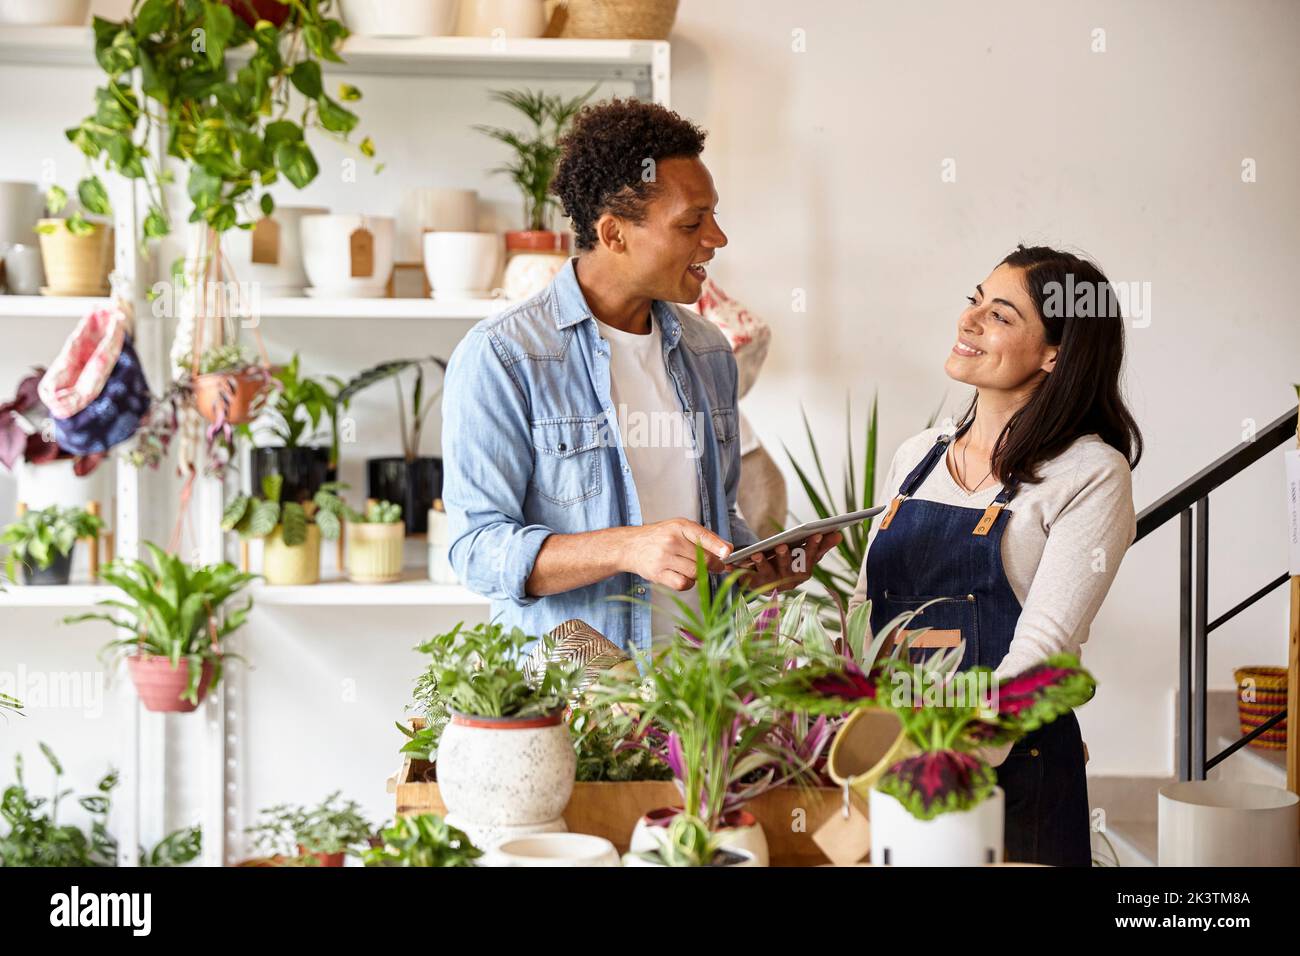 Latin American male gardener discussing over digital tablet with female coworker Stock Photo